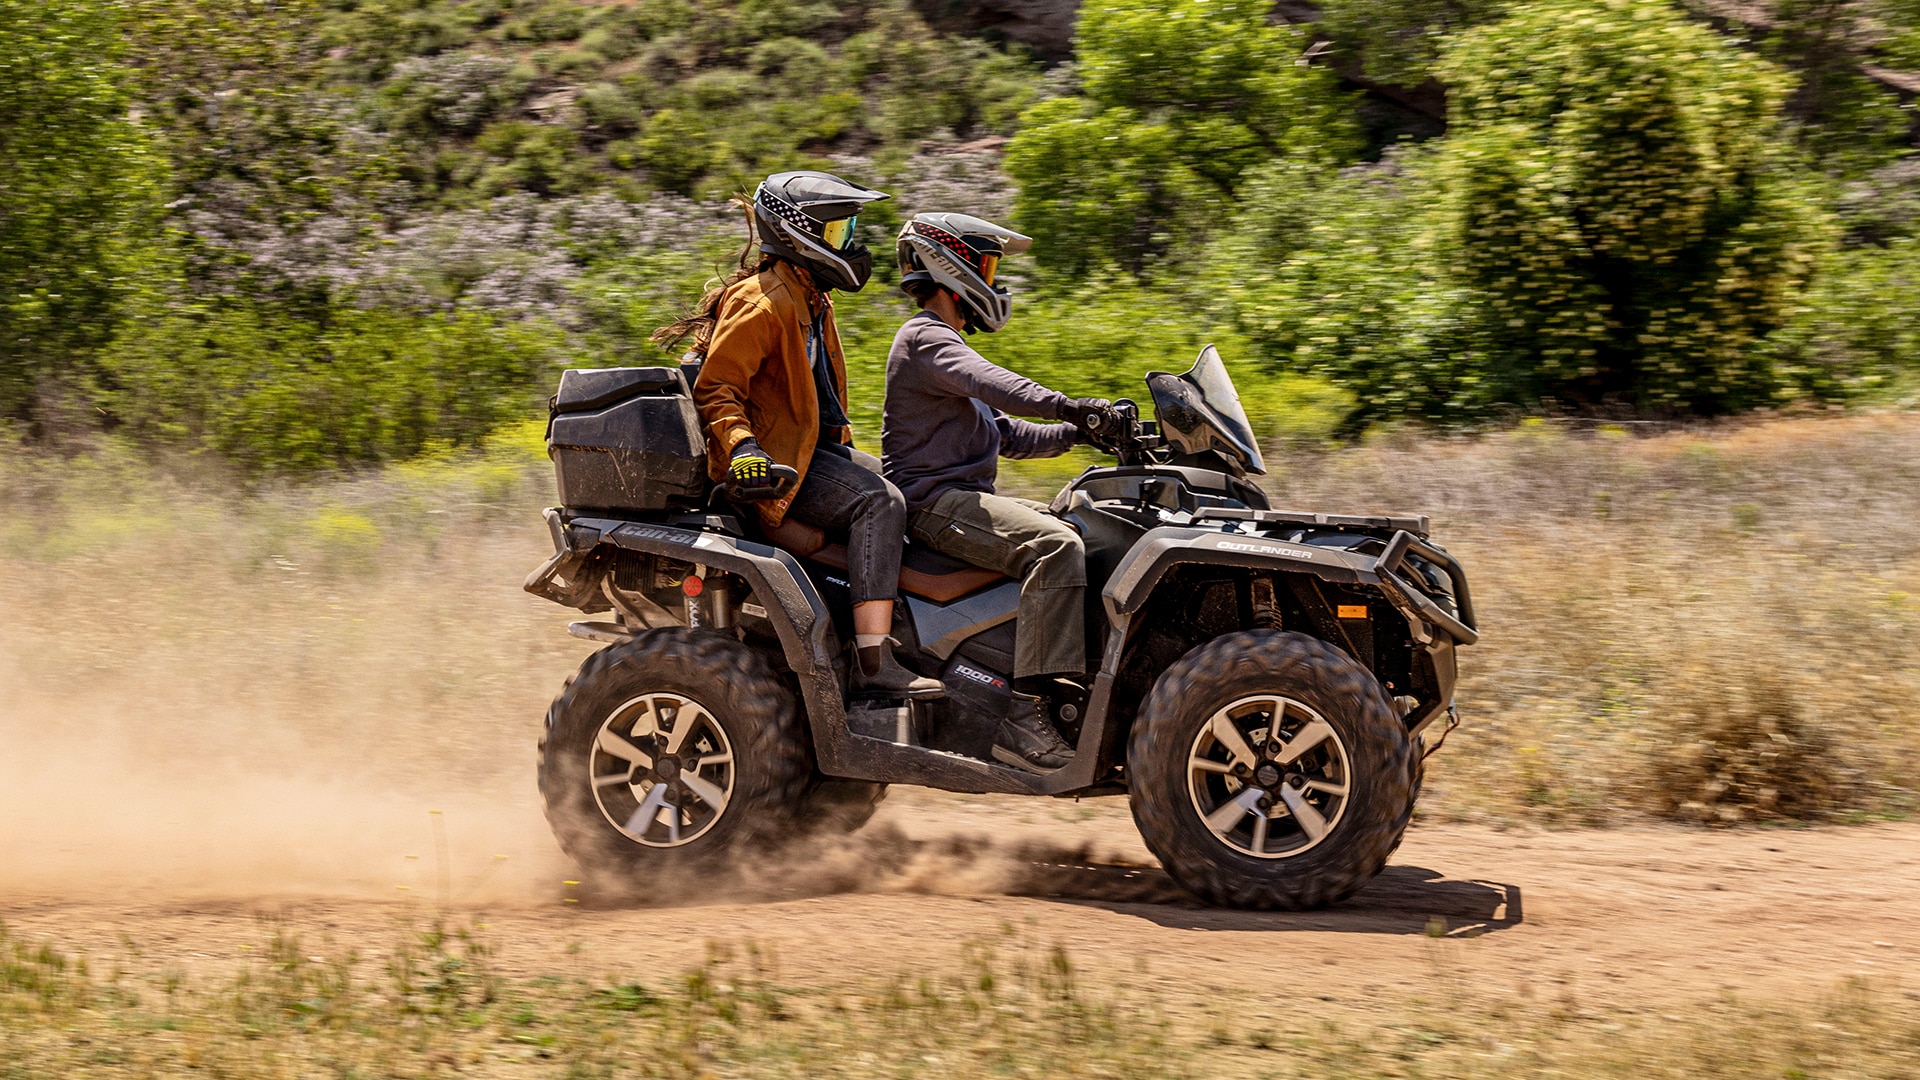 Two women riding on a Can-Am Outlander ATV on a dirt road